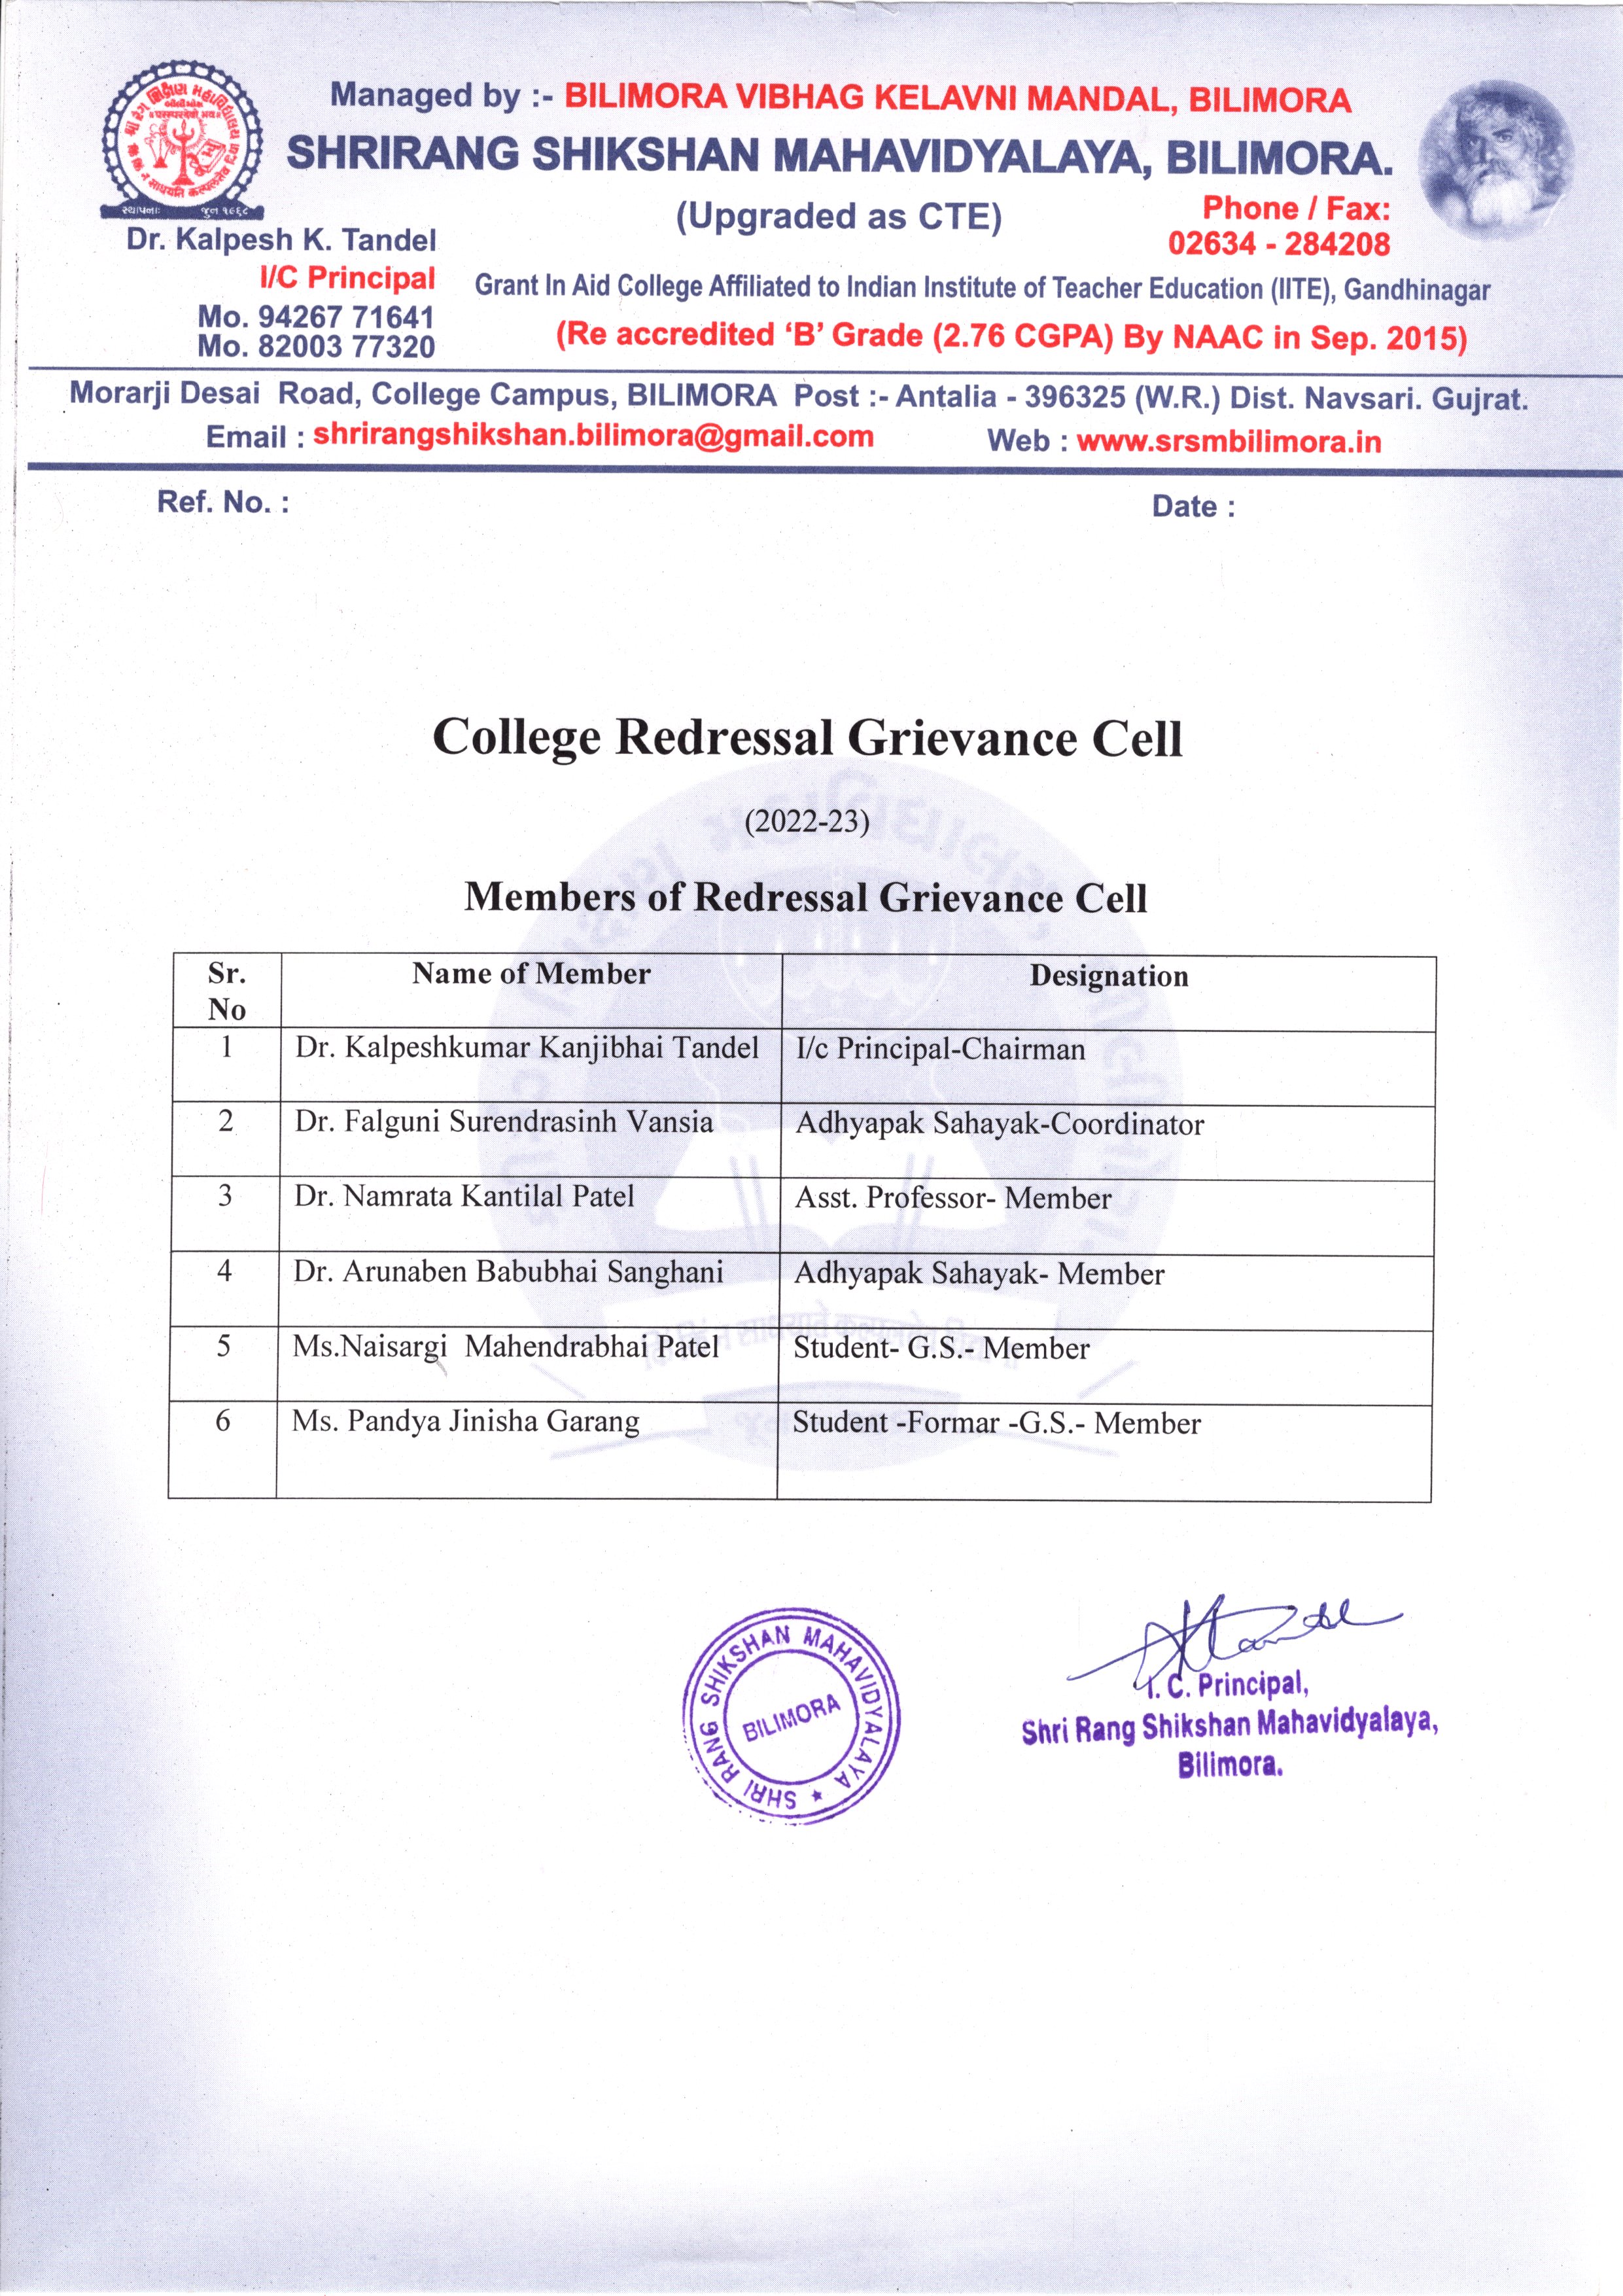 College Grievance Redressal Cell